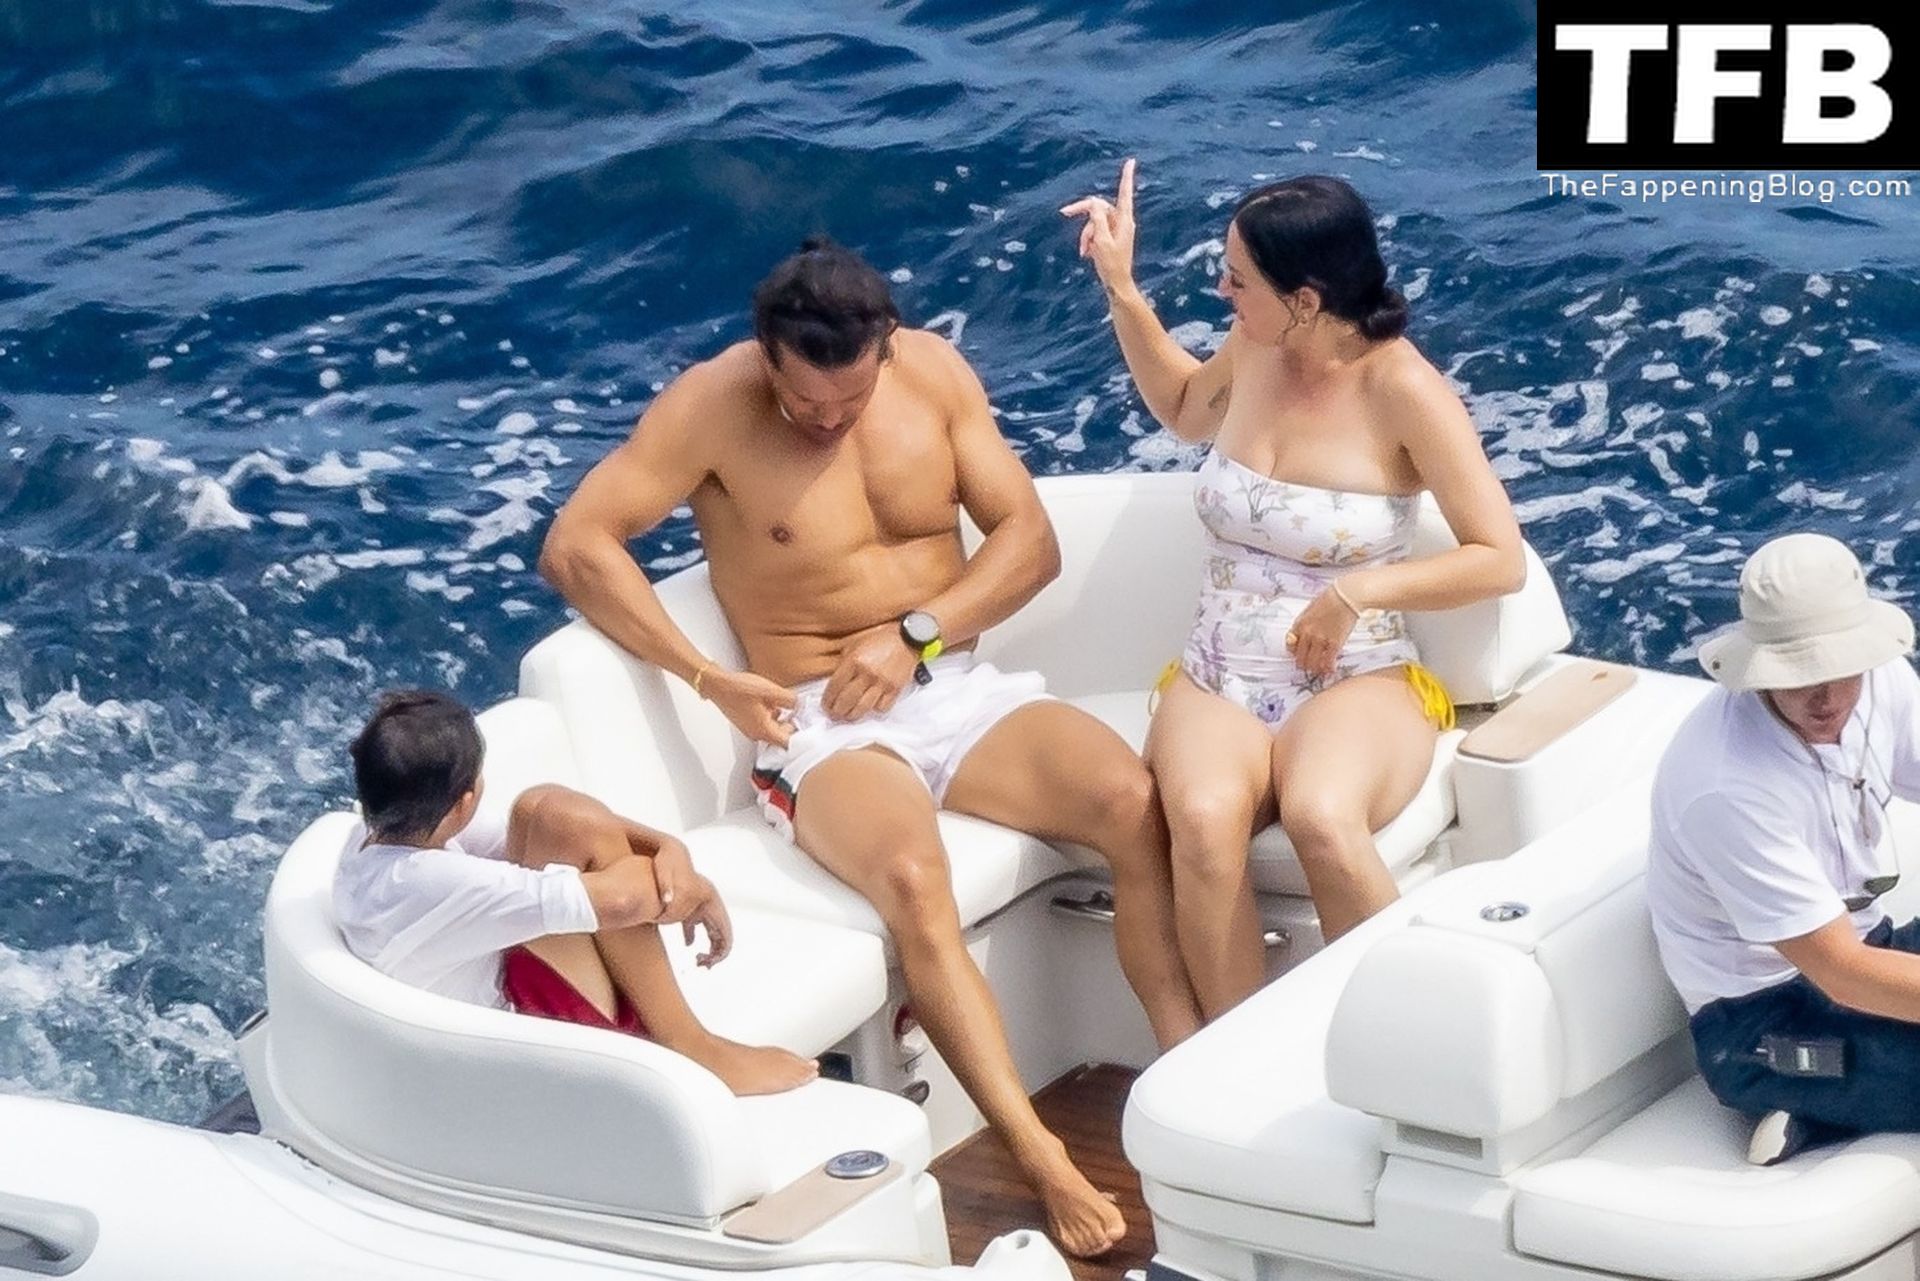 Katy Perry Sexy The Fappening Blog 10 - Katy Perry Rocks a Strapless Swimsuit While Enjoying a Beach Day with Orlando Bloom in Positano (105 Photos)